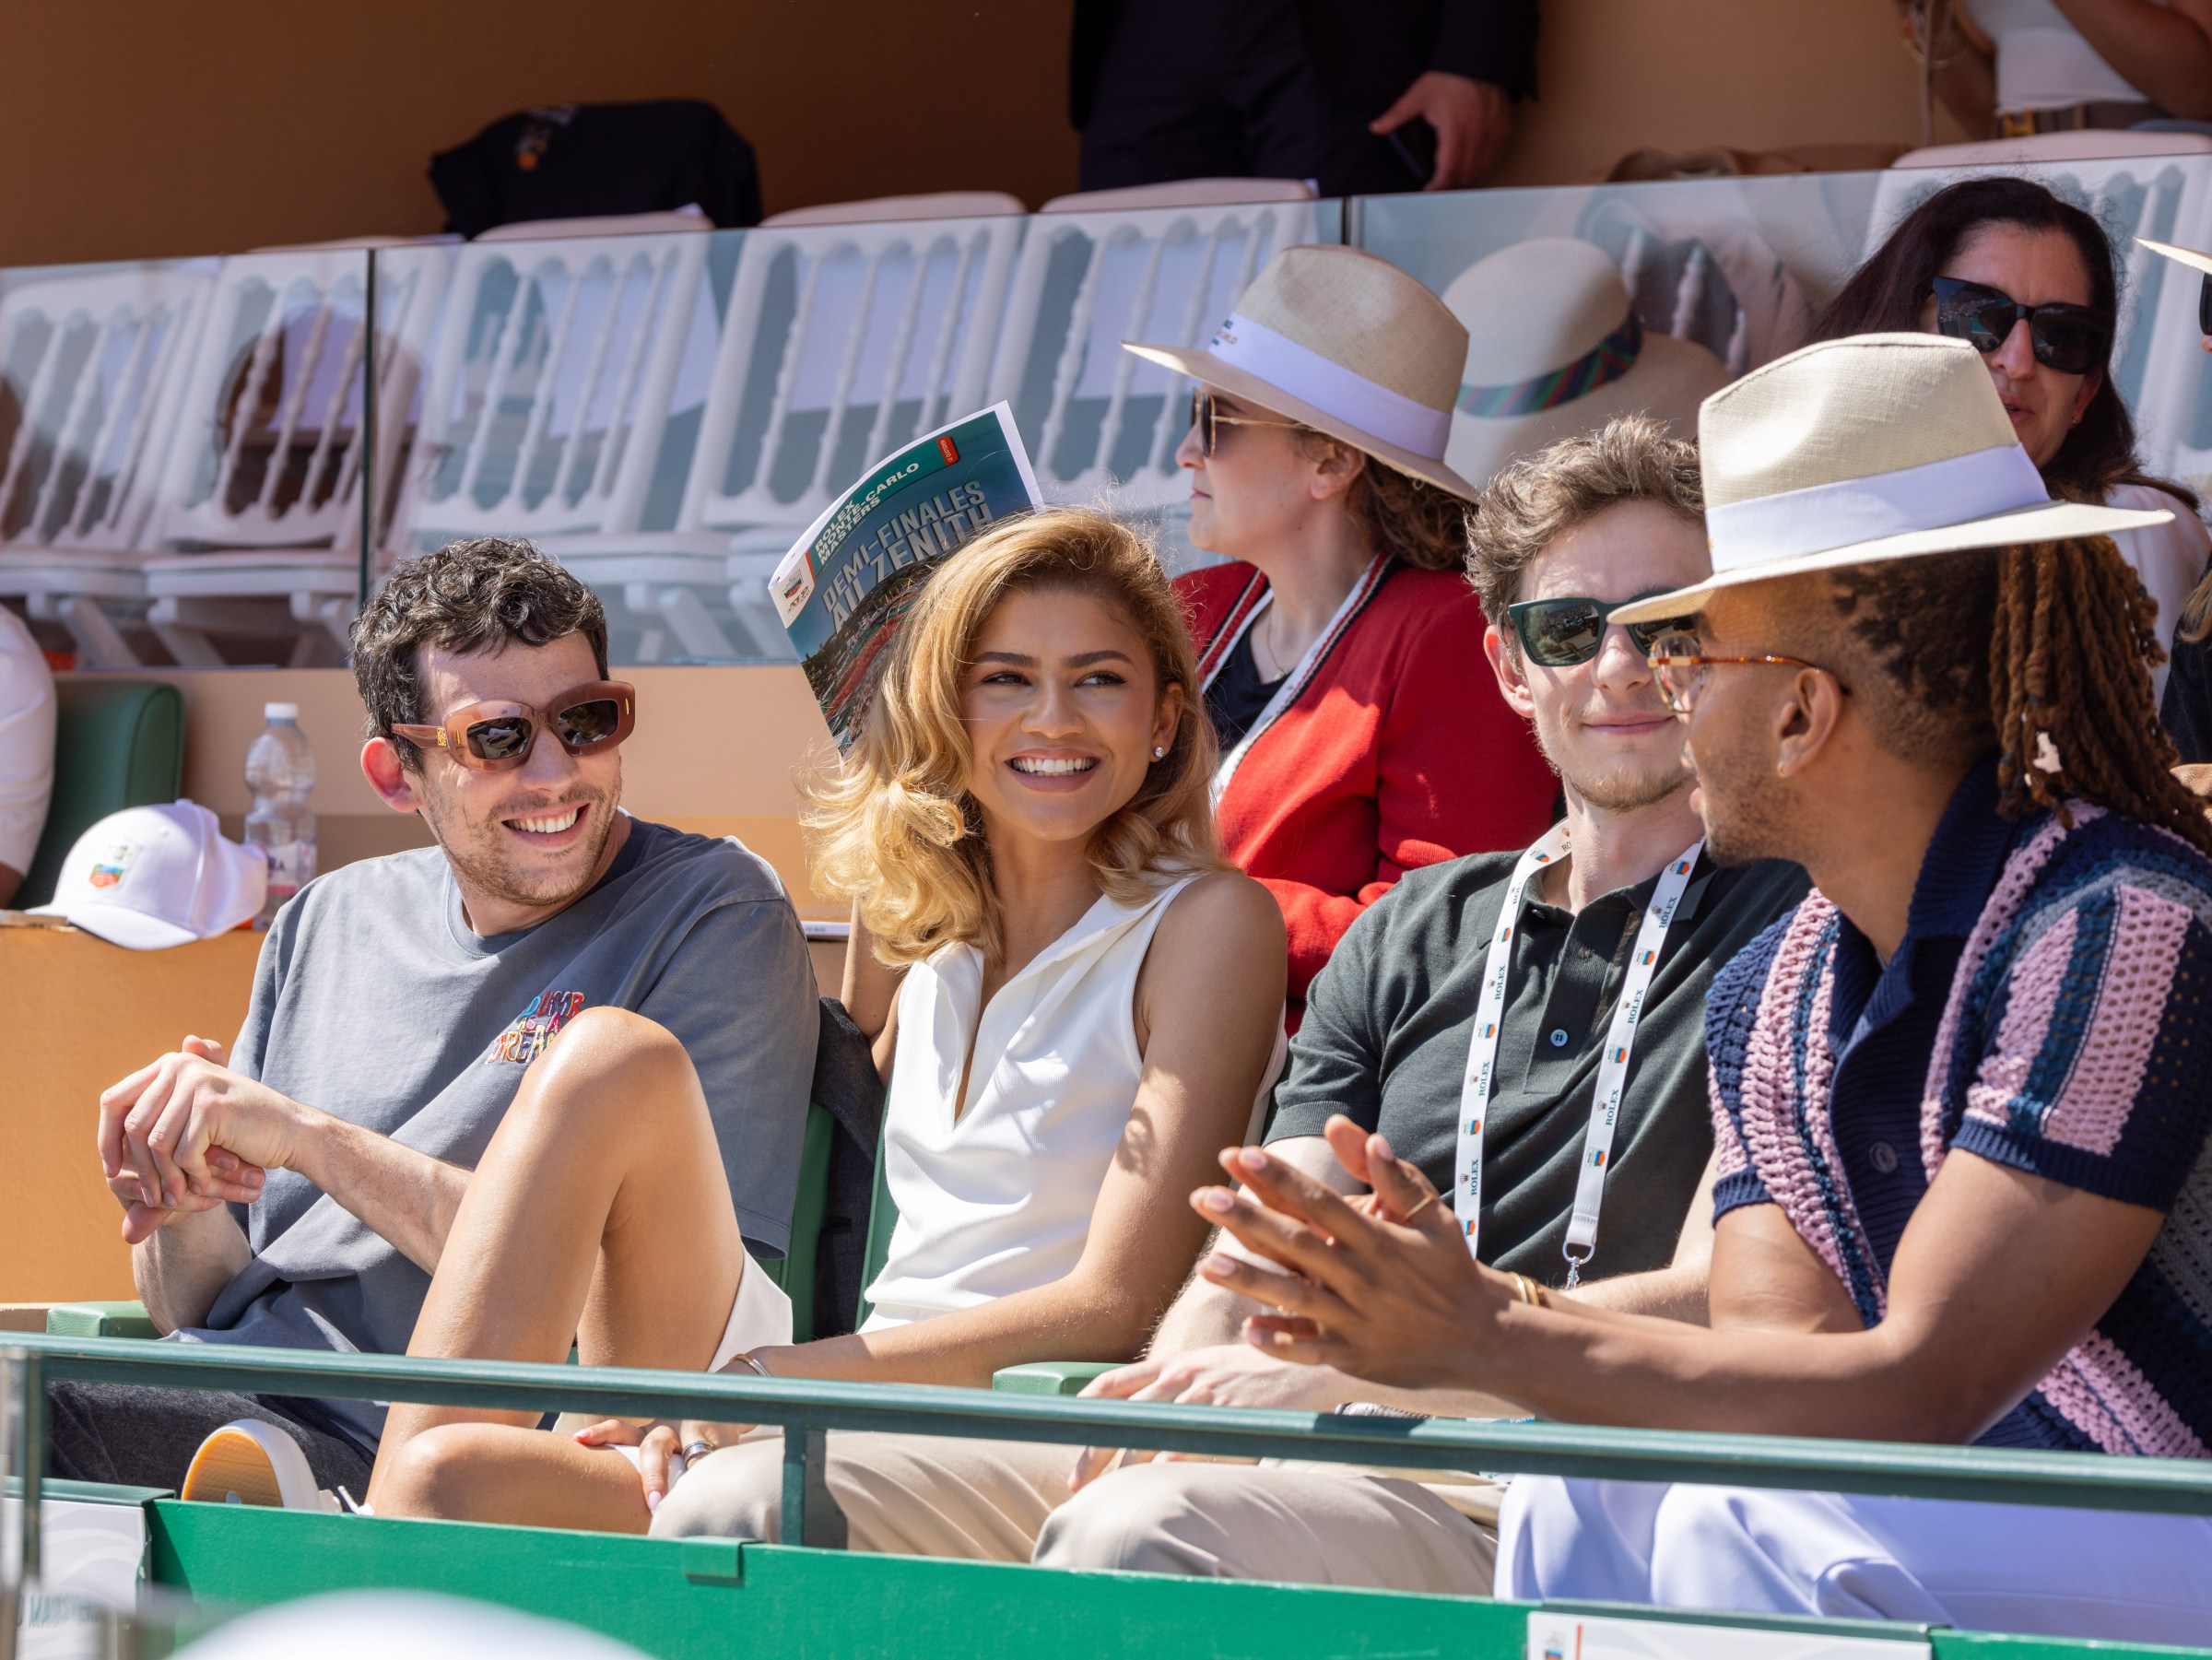 Zendaya and her Challengers co-stars attend the Monte Carlo Masters tennis tournament.